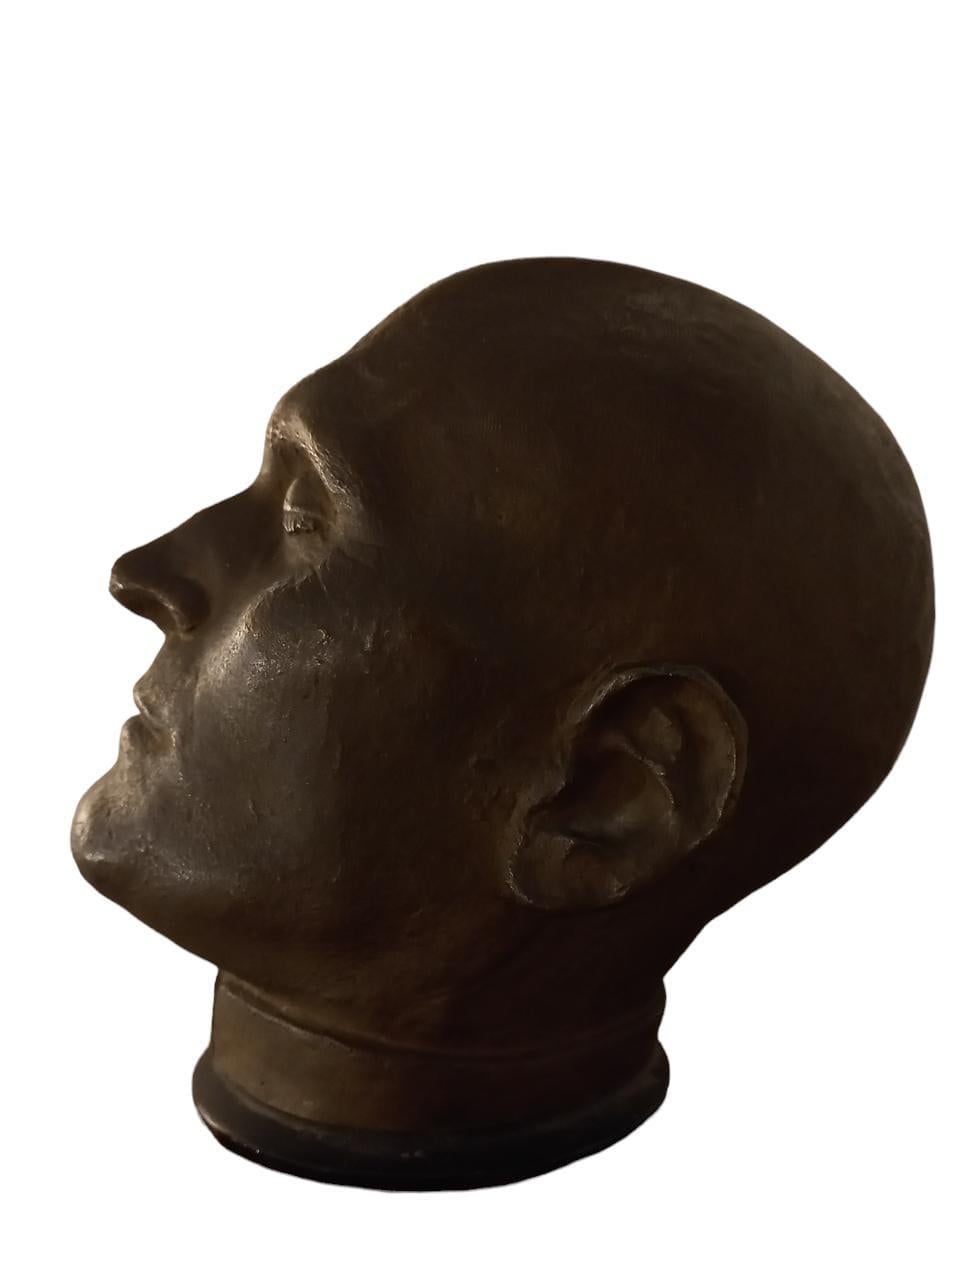 Head of Gabriele D'Annunzio, bronze sculpture from the first half of the 20th century, height 25 cm, dimensions 19x23 cm.
The sculpture depicts the head of the poet, who was born in Pescaranin 1863 and died in Gardone Riviera in 1938, with his eyes